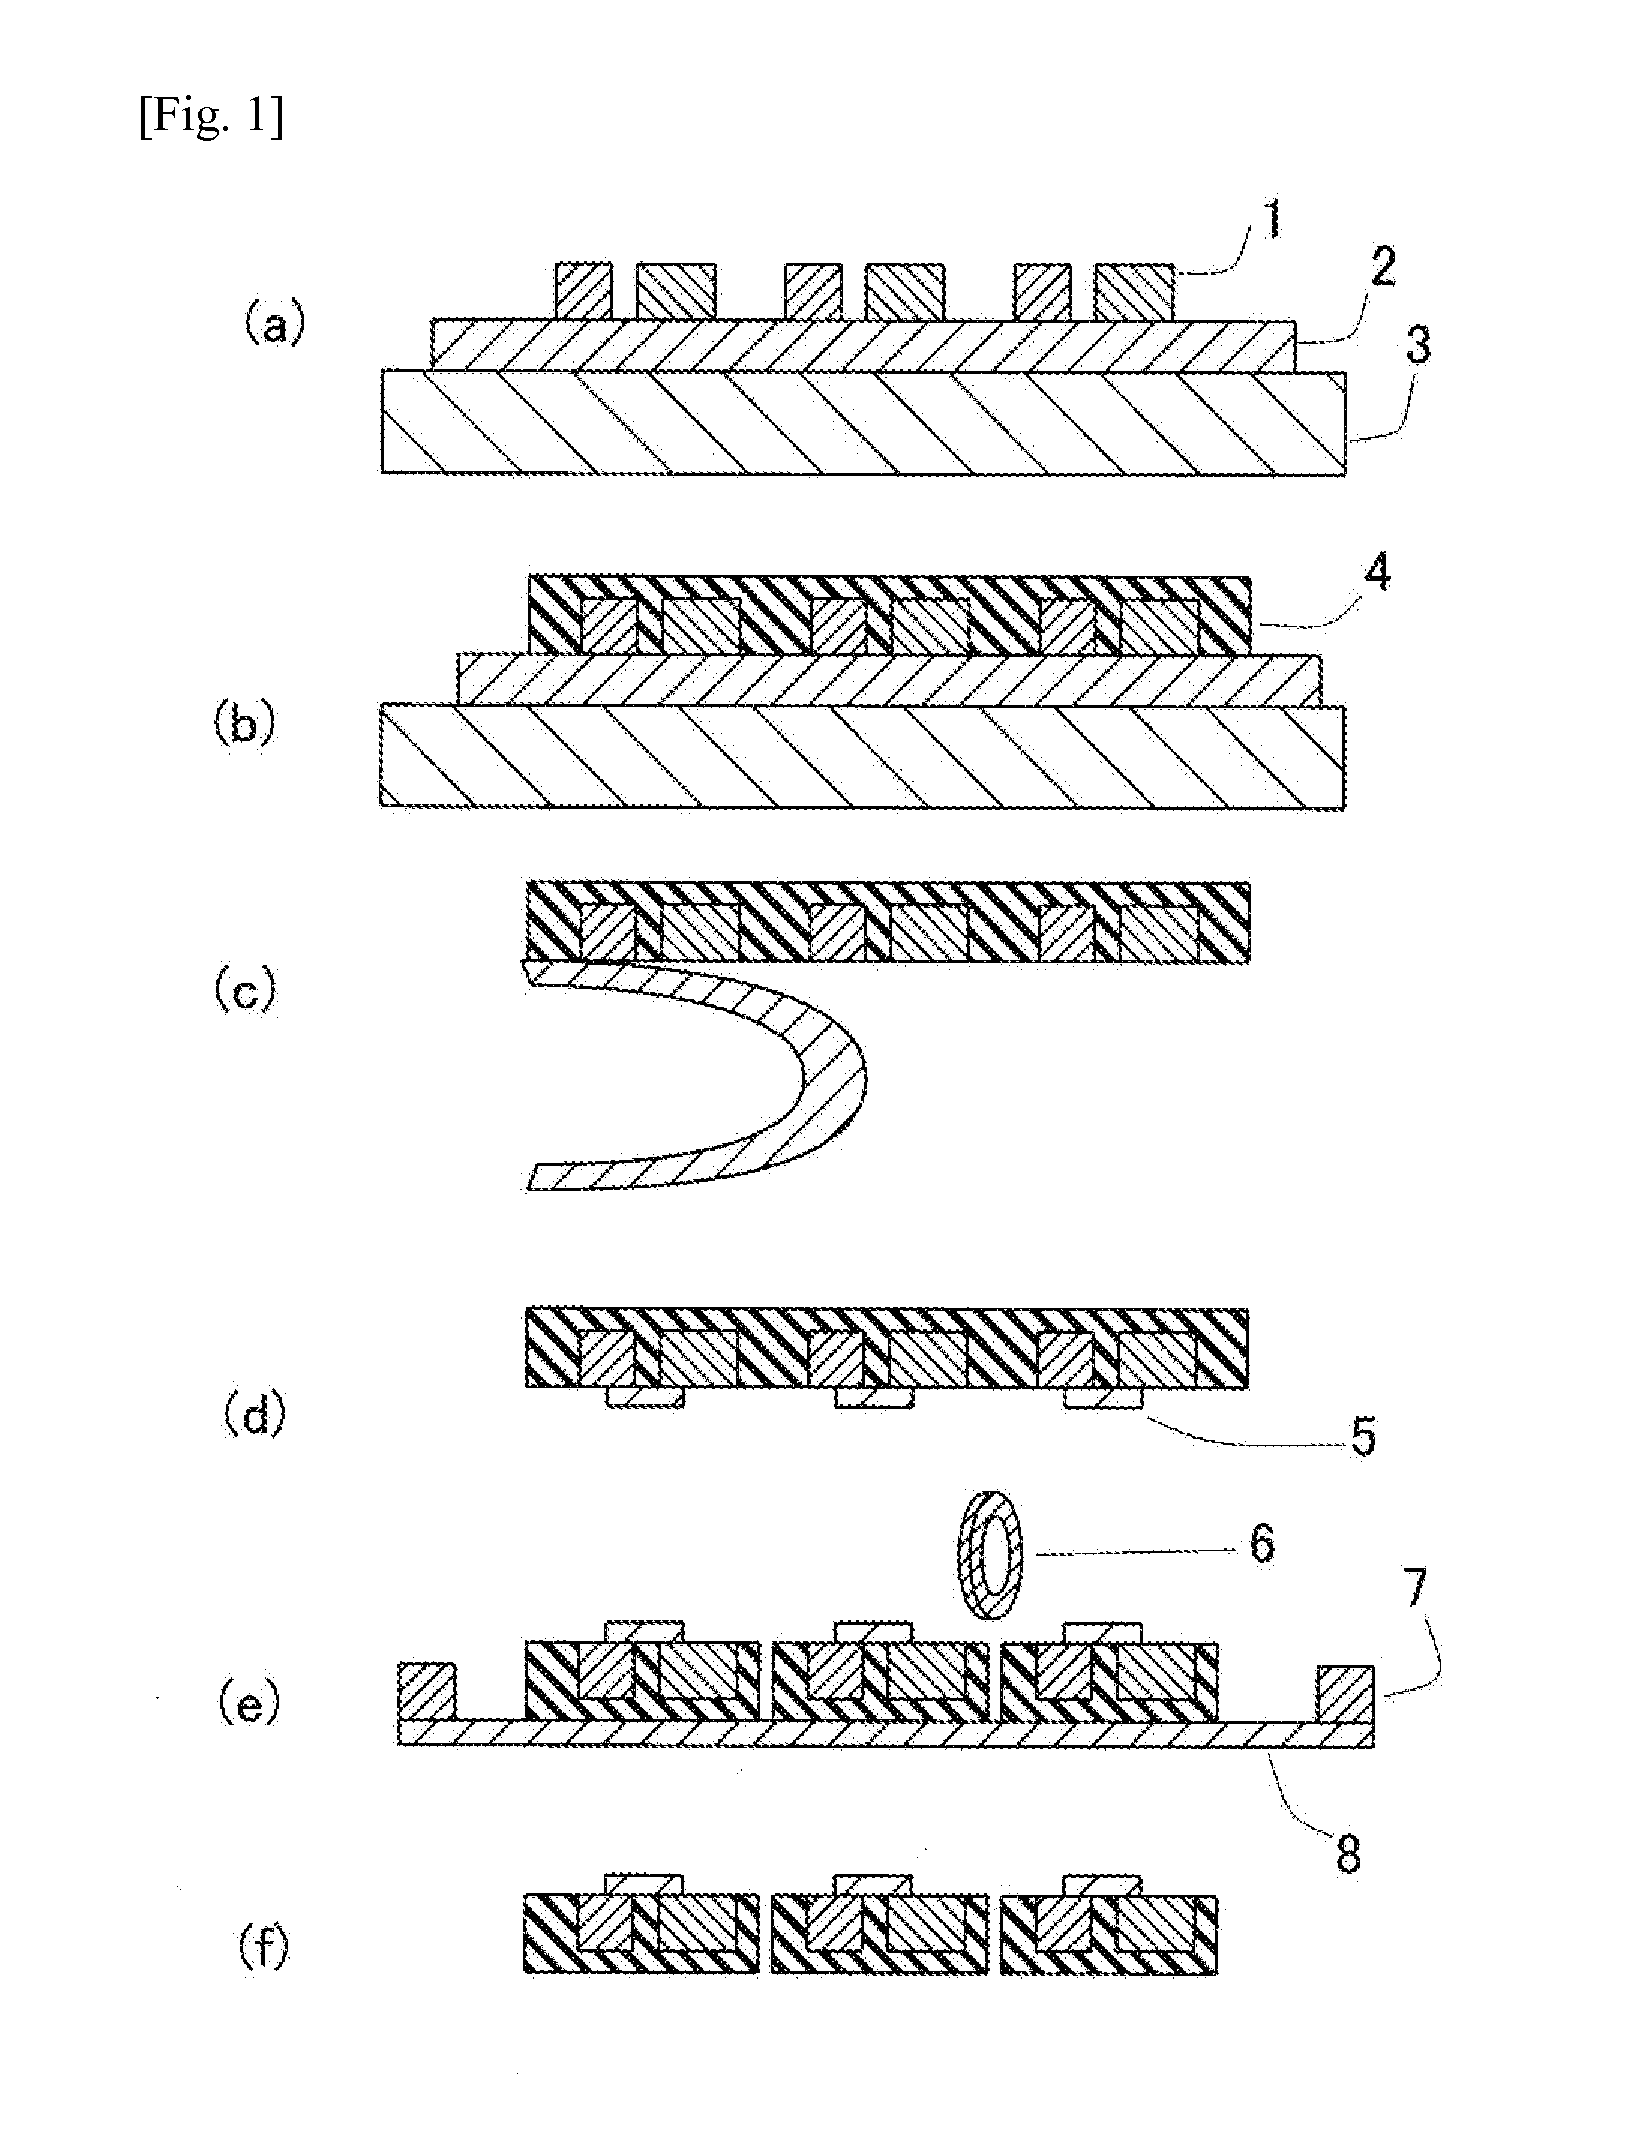 Heat-resistant adhesive sheet for substrateless semiconductor package fabrication and method for fabricating substrateless semiconductor package using the adhesive sheet